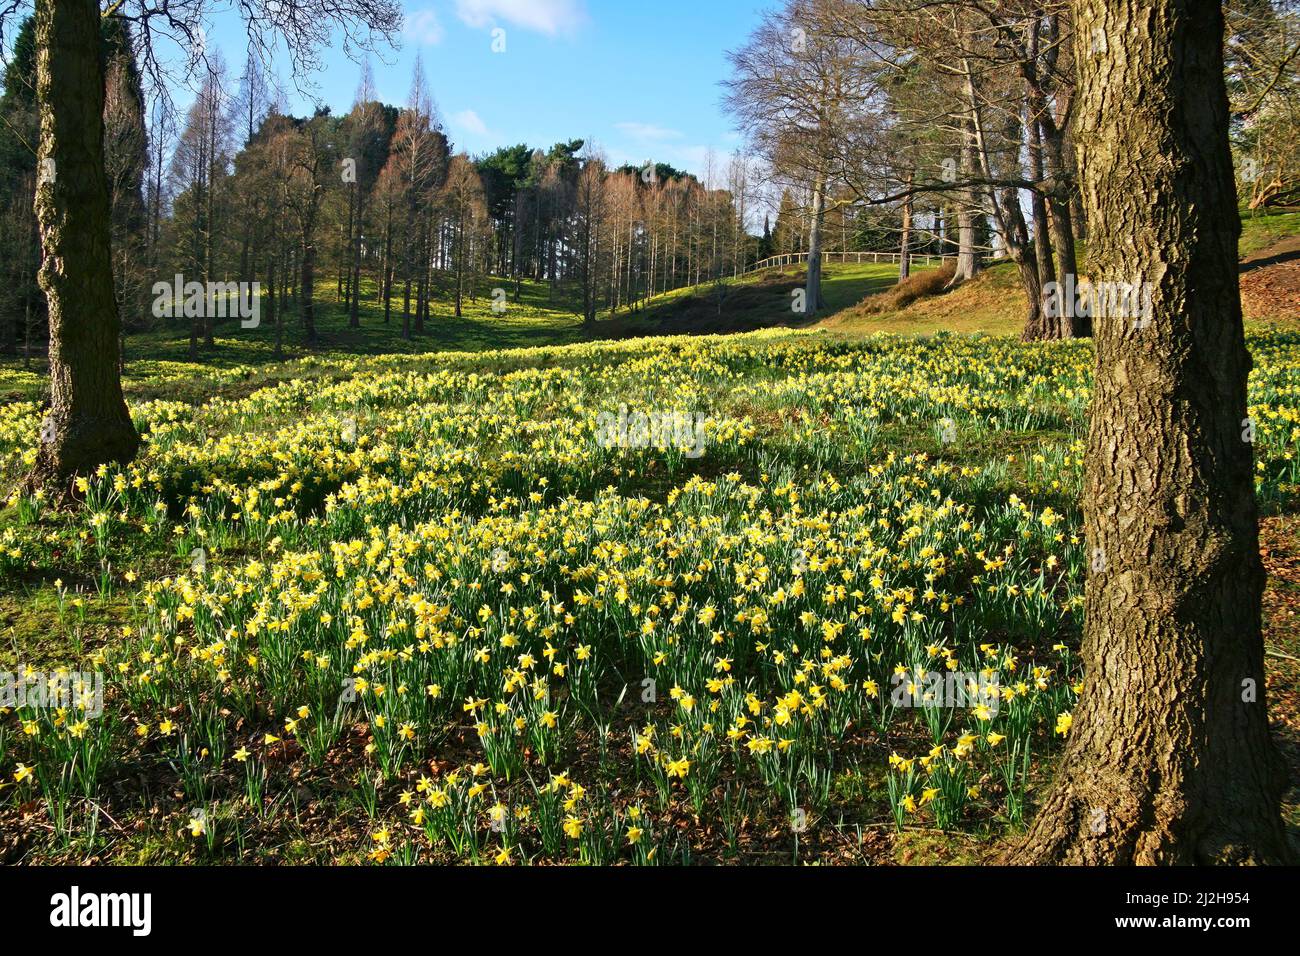 Forest parkland with yellow daffodil flowers blooming in spring, Derbyshire, England Stock Photo